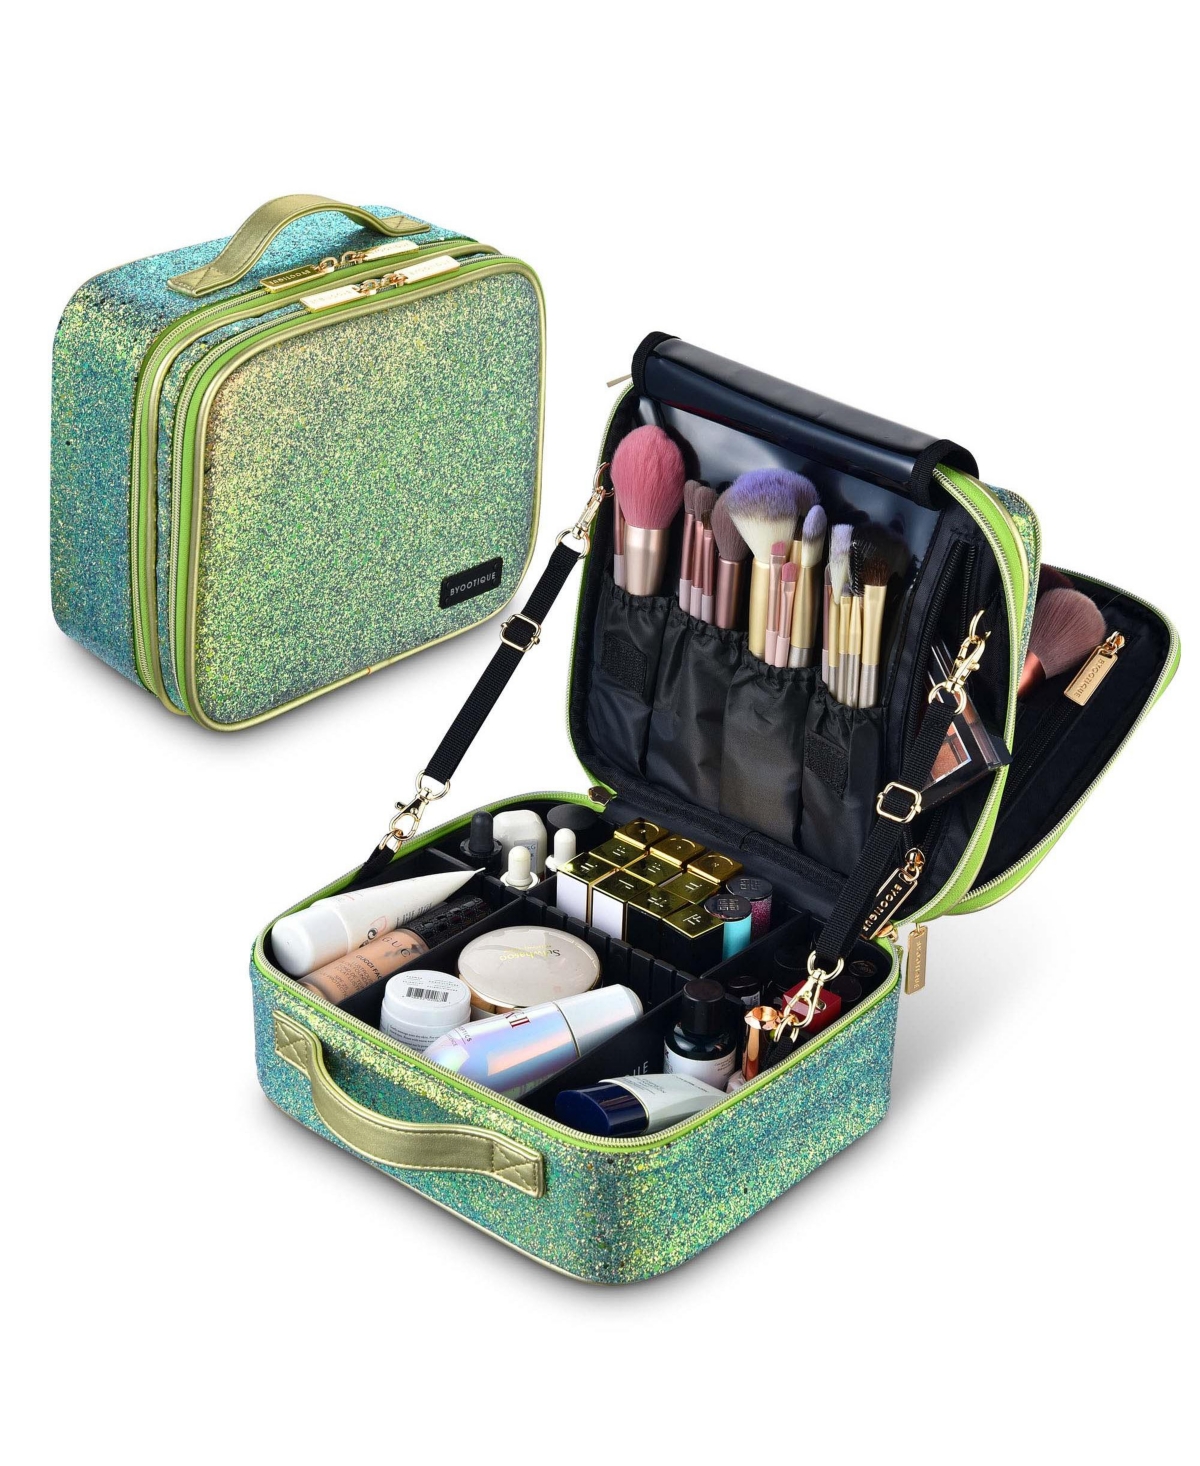 Byootique Portable Glitter Makeup Train Case Brush Holder Cosmetic Bag Travel - Glitter silver